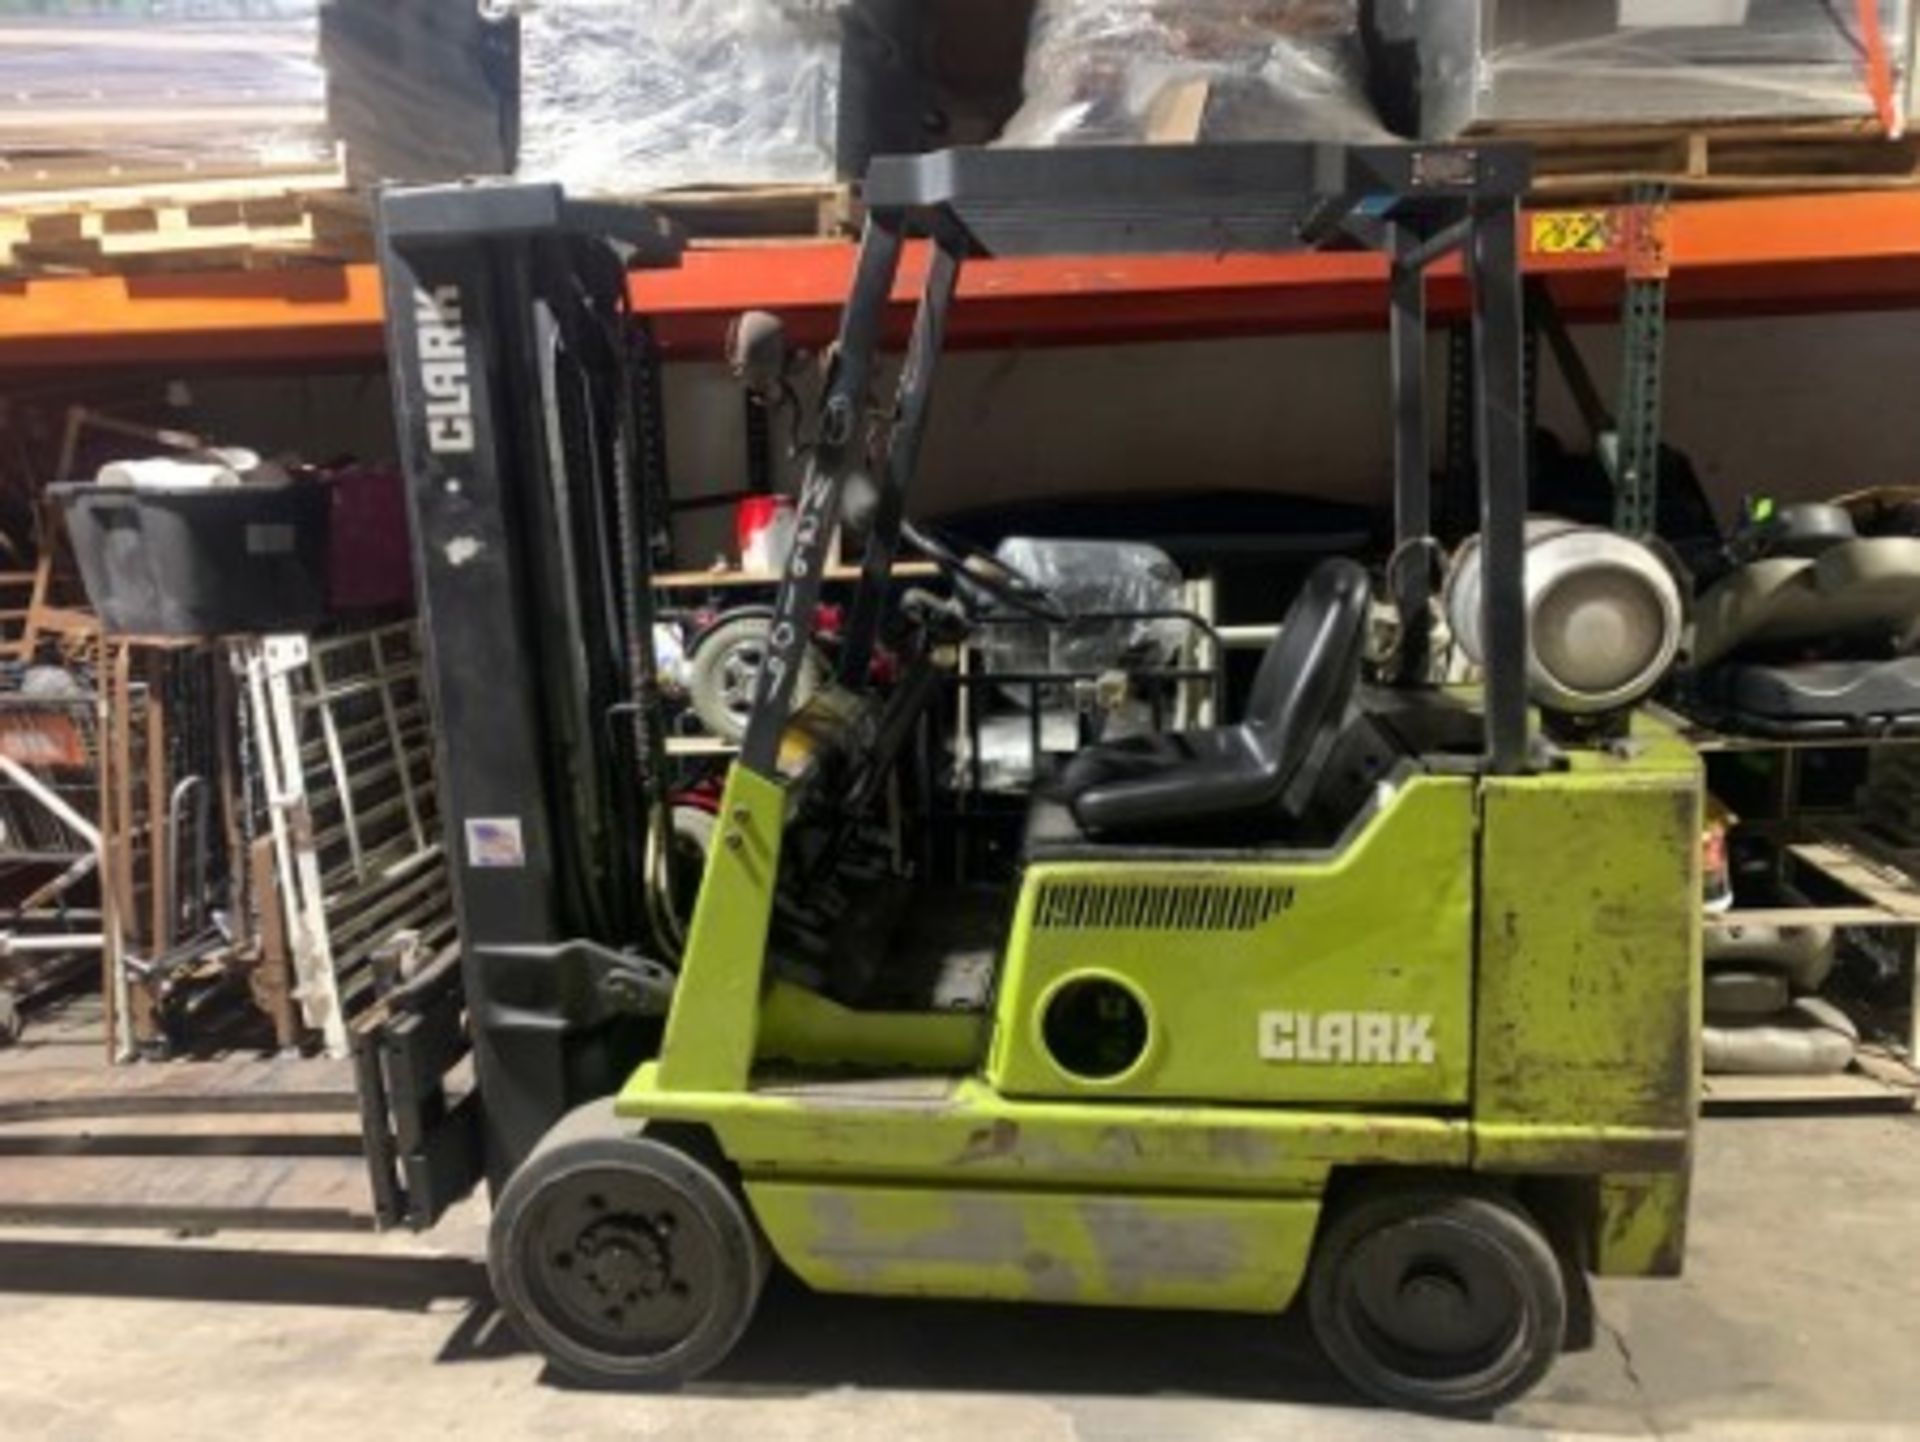 CLARK GC25 FORKLIFT - LPG - 4,775LB CAPACITY - 3-STAGE - Image 7 of 8